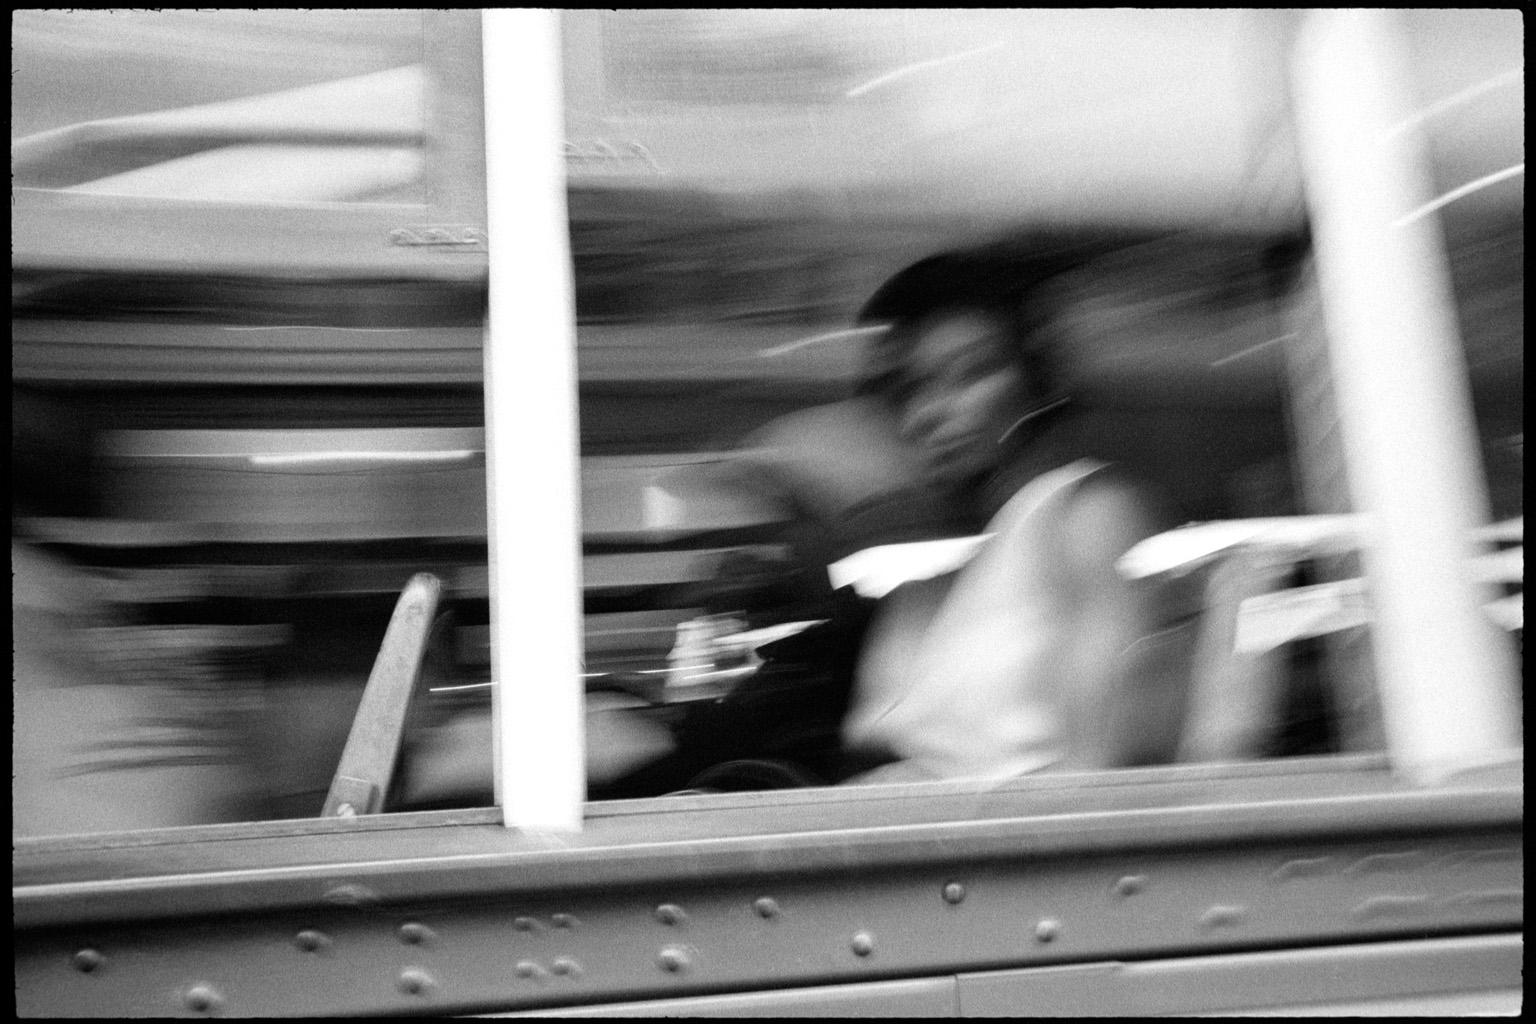 This is a 39.5 x 59 inches archival giclée black and white print on archival exhibition paper. It shows a woman looking straight into the camera from the window of one of the New Orleans historic street cars.  It is part of a limited edition of 6